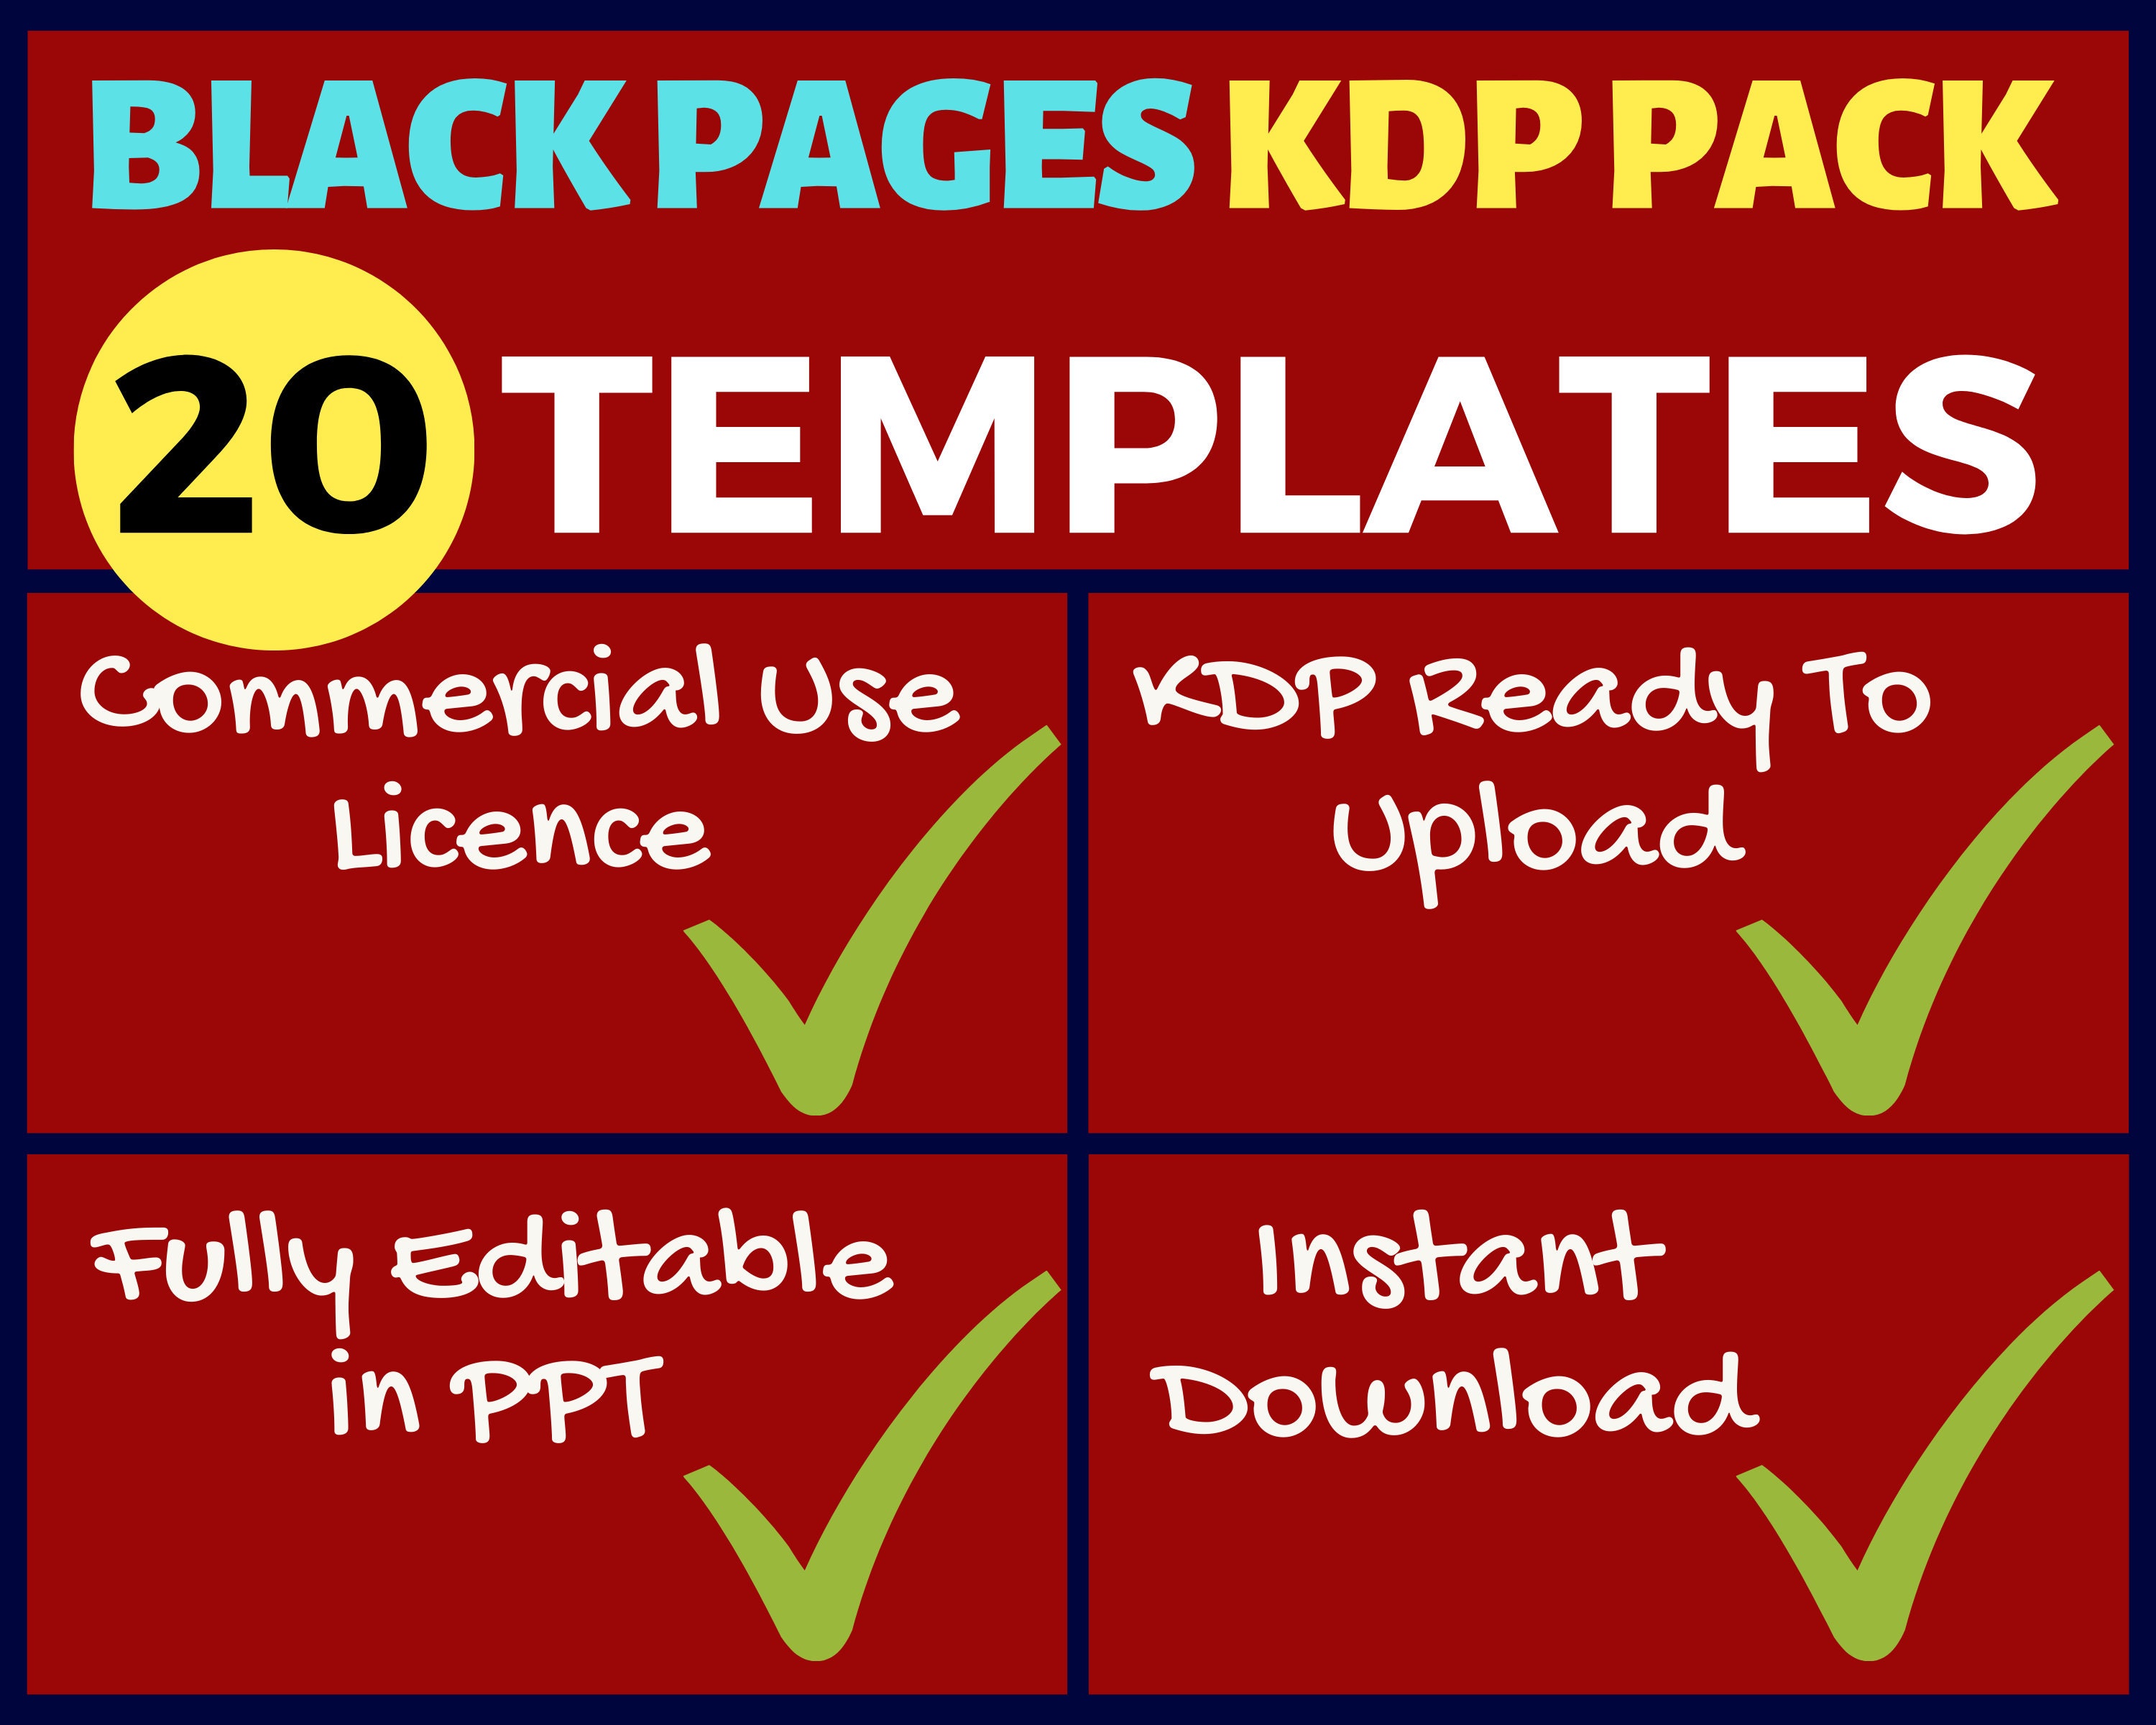 Download Kdp Black Pages Pack 20 Templates Commercial Use Resell Etsy